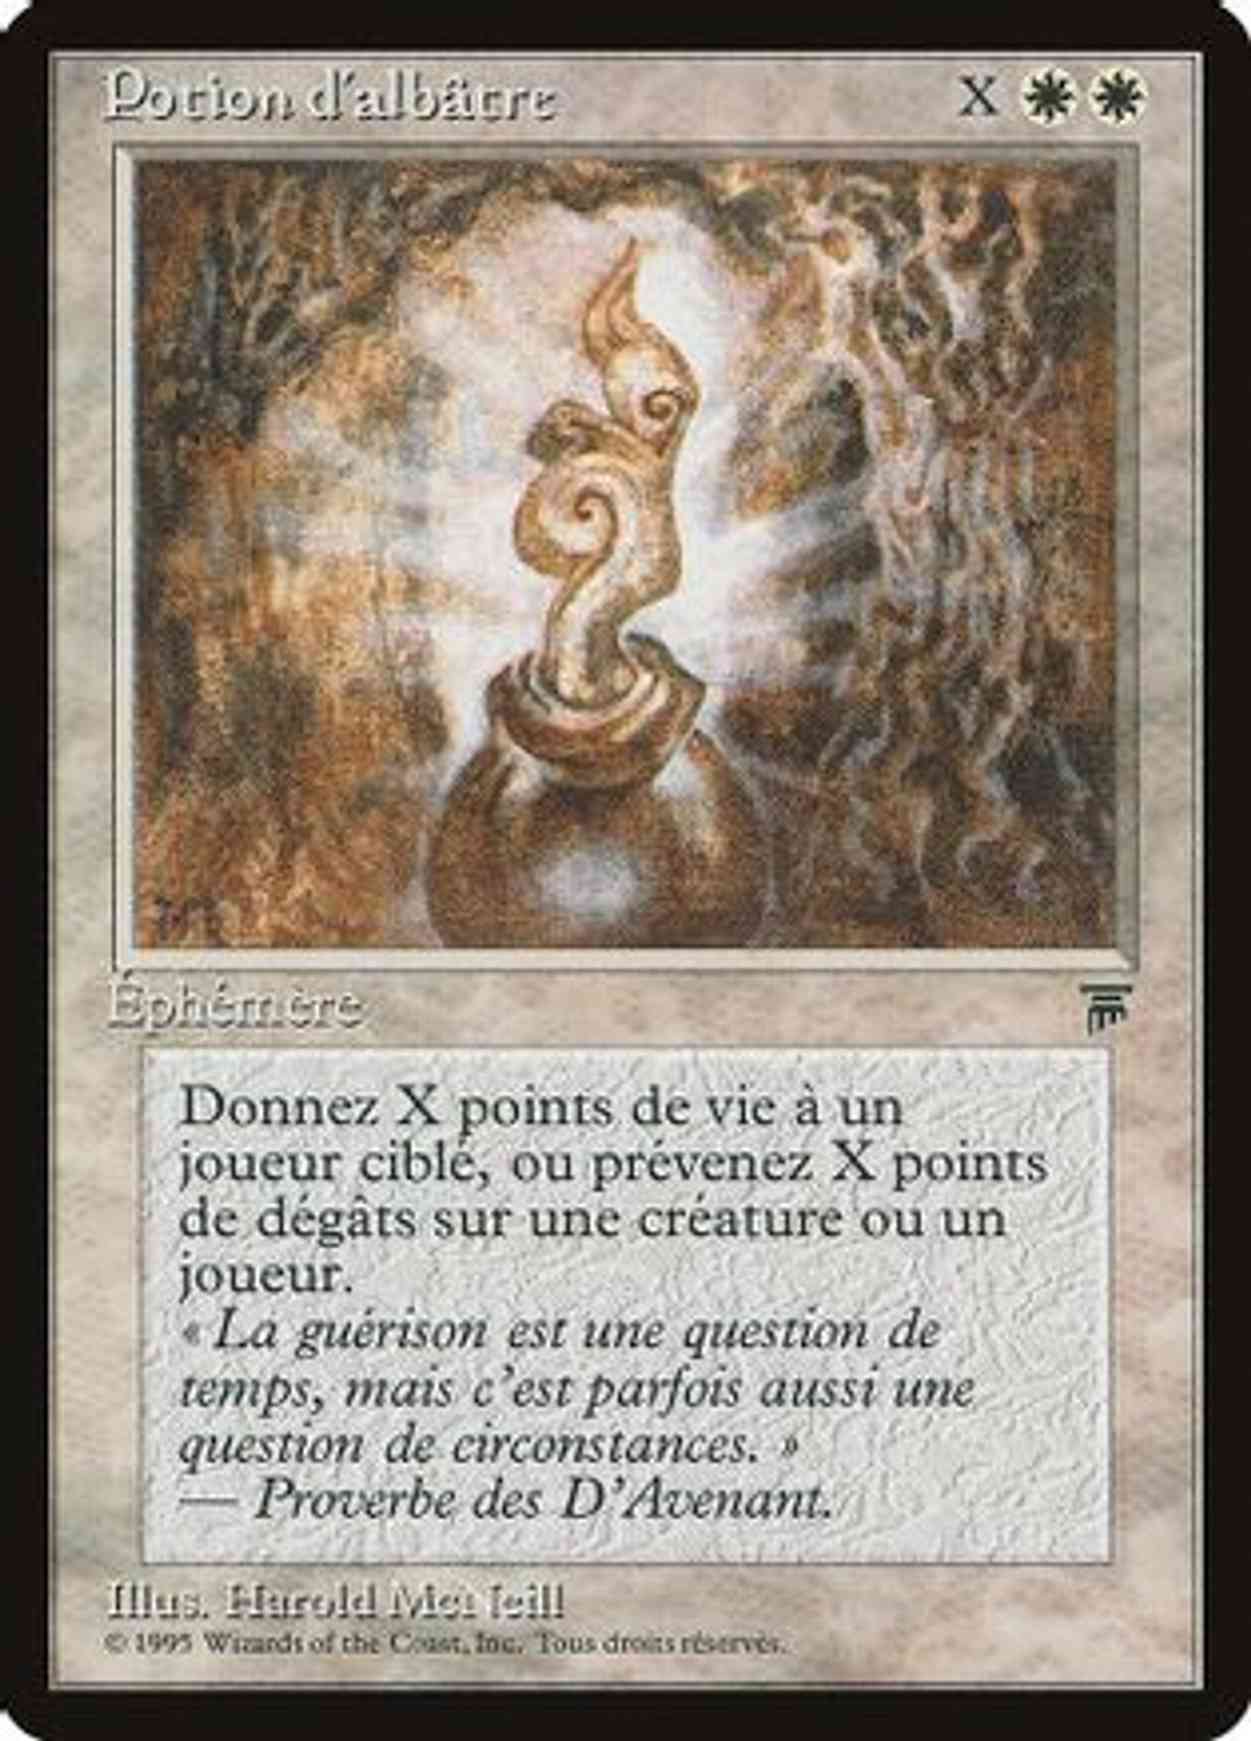 Alabaster Potion (French) - "Potion d'albatre" magic card front